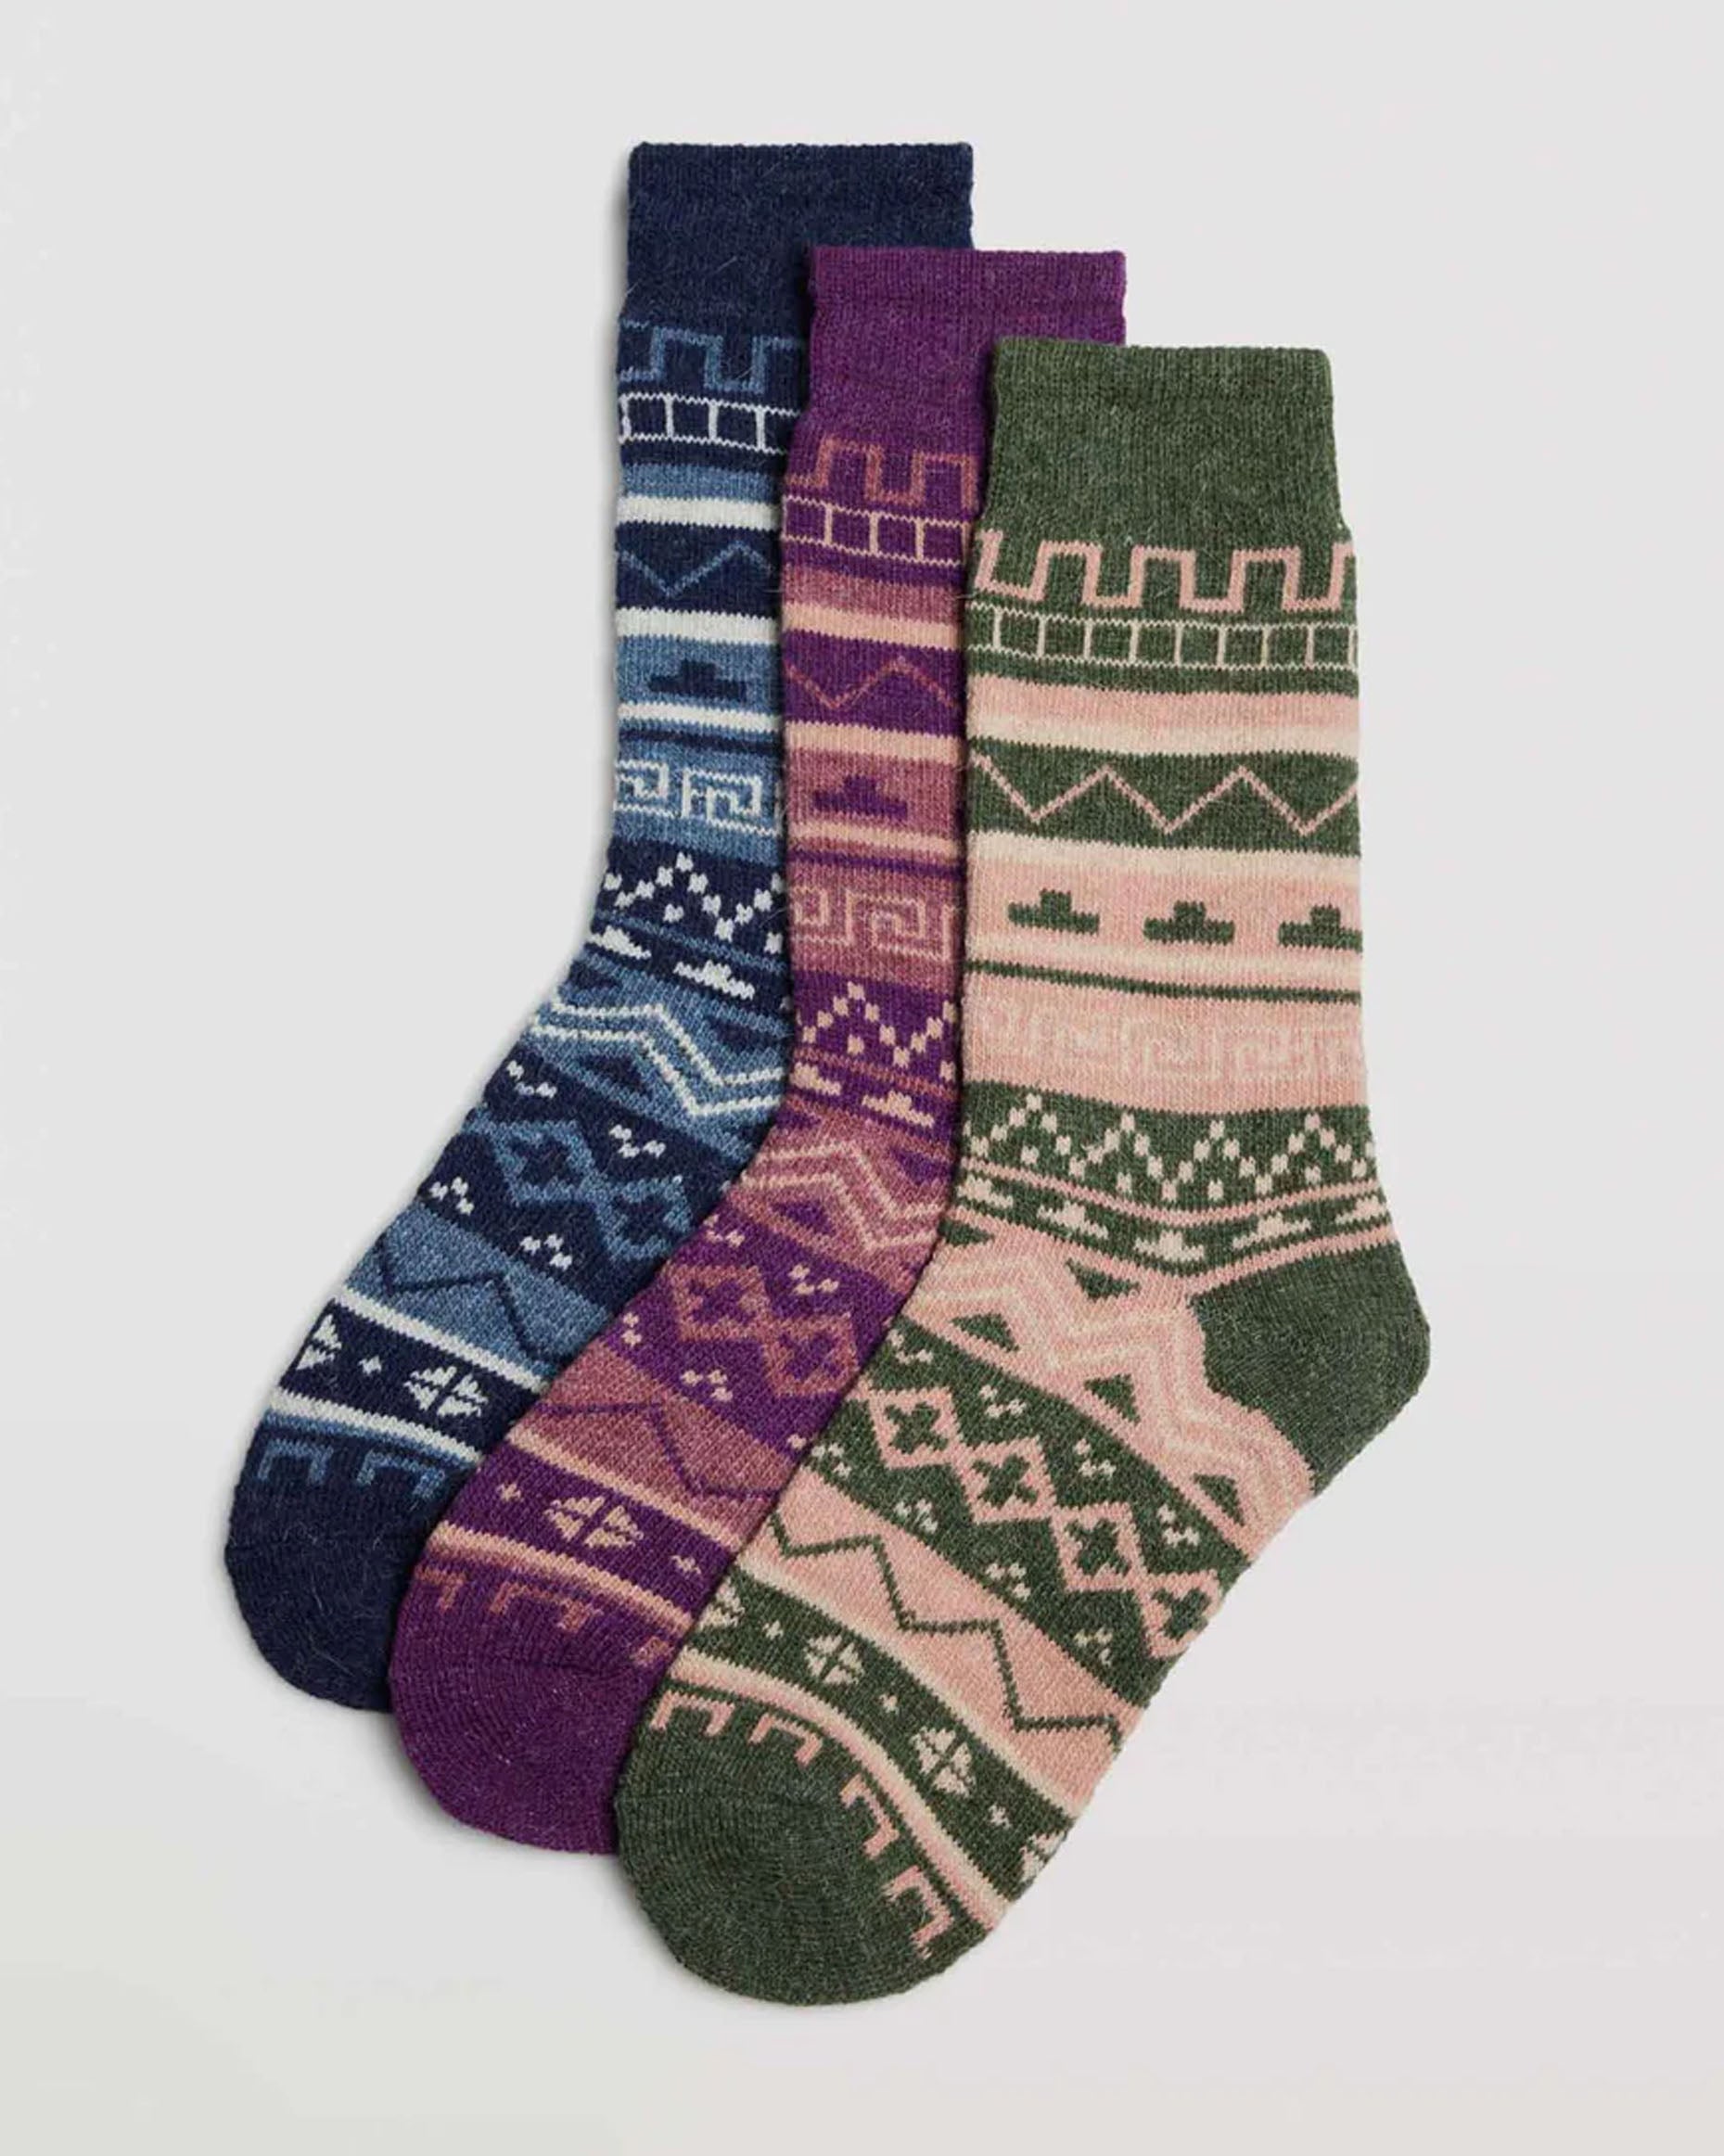 Ysabel Mora 12888 Aztec Socks - Warm wool and angora mix thermal socks with an Aztec style pattern. Available in blue, green and purple/pink